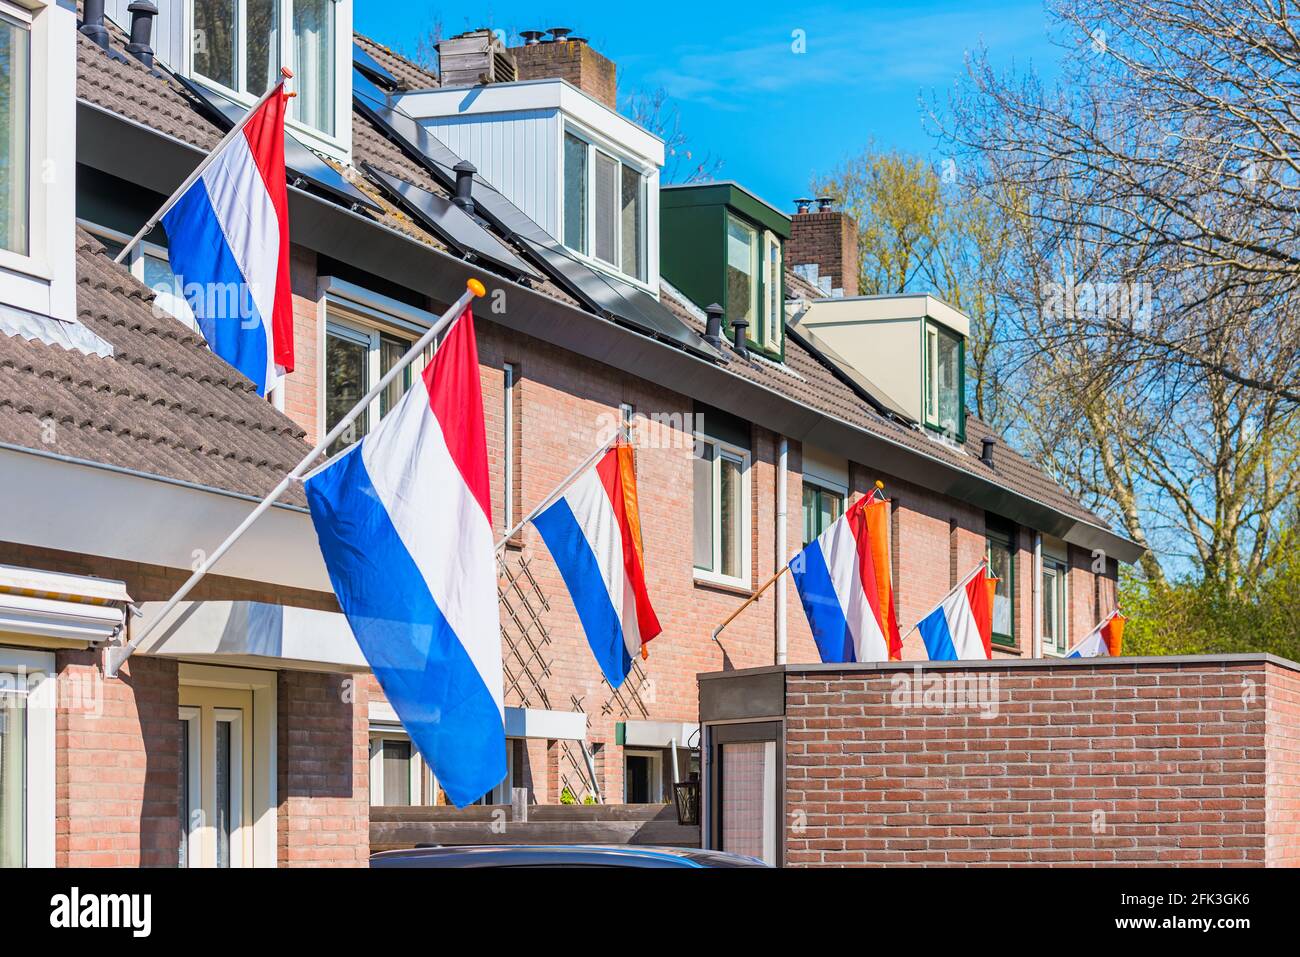 Dutch Flags hanging outside houses in Alkmaar, Netherlands to celebrate King's Day on April 27, a national Holiday in The Netherlands Stock Photo